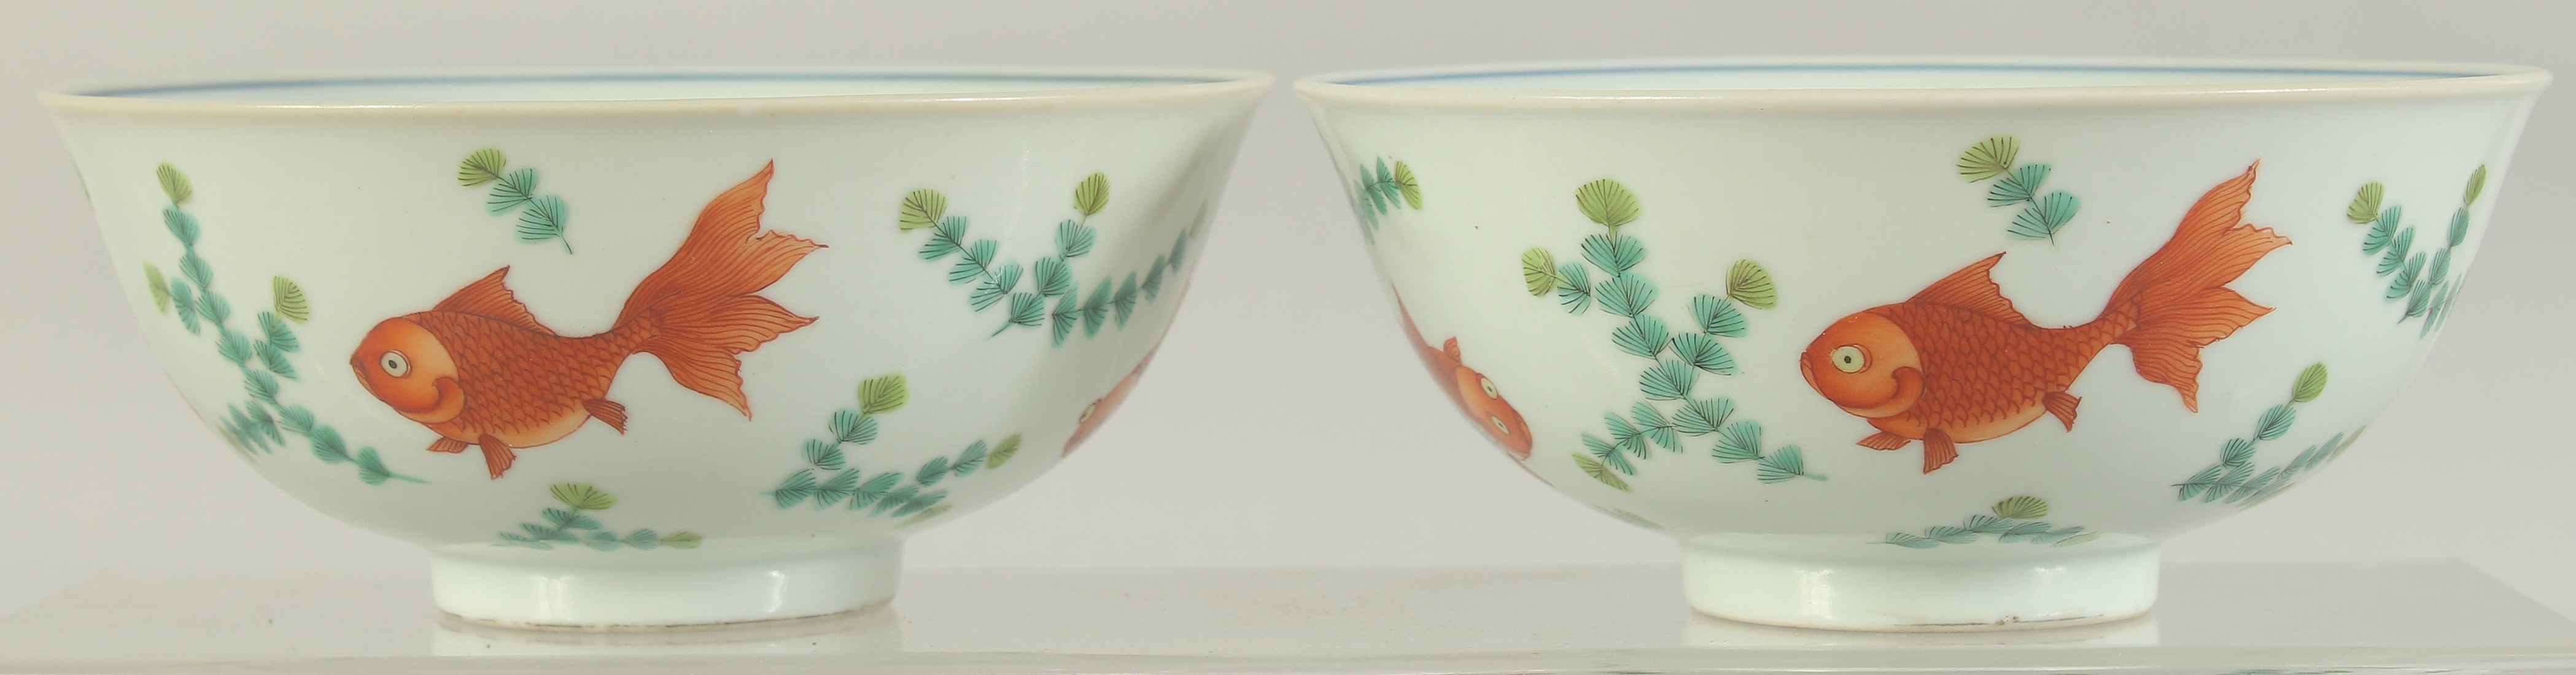 A PAIR OF CHINESE FAMILLE ROSE PORCELAIN BOWLS, the exterior painted with coral red fish, the - Image 4 of 9